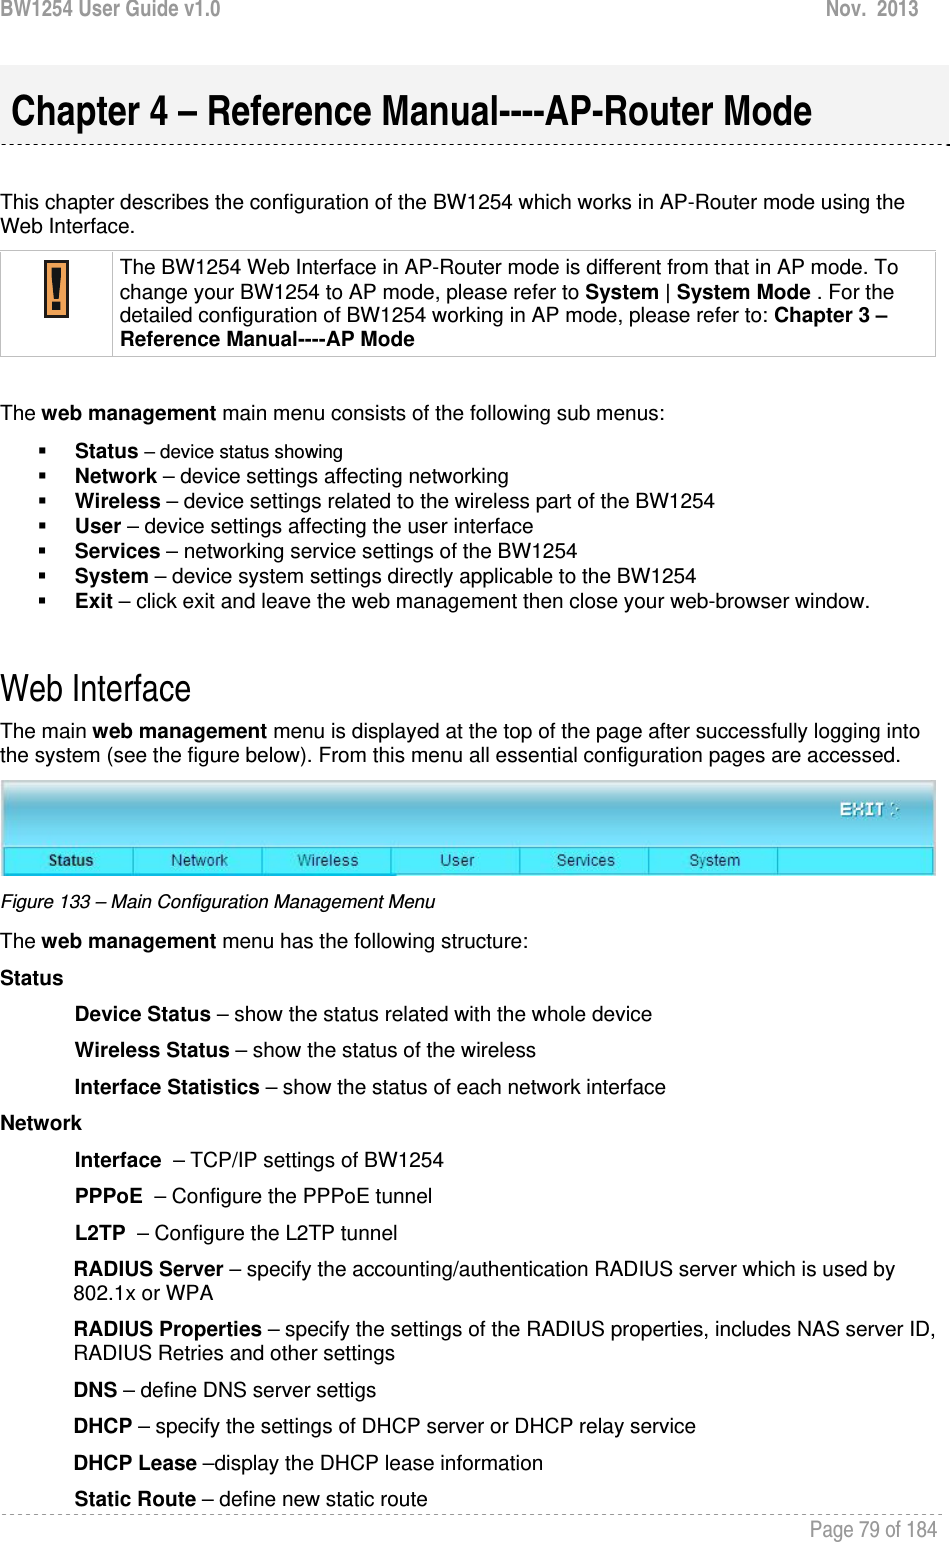 BW1254 User Guide v1.0  Nov.  2013     Page 79 of 184    This chapter describes the configuration of the BW1254 which works in AP-Router mode using the Web Interface.  The BW1254 Web Interface in AP-Router mode is different from that in AP mode. To change your BW1254 to AP mode, please refer to System | System Mode . For the detailed configuration of BW1254 working in AP mode, please refer to: Chapter 3 – Reference Manual----AP Mode  The web management main menu consists of the following sub menus:  Status – device status showing  Network – device settings affecting networking  Wireless – device settings related to the wireless part of the BW1254  User – device settings affecting the user interface  Services – networking service settings of the BW1254  System – device system settings directly applicable to the BW1254  Exit – click exit and leave the web management then close your web-browser window.  Web Interface The main web management menu is displayed at the top of the page after successfully logging into the system (see the figure below). From this menu all essential configuration pages are accessed.  Figure 133 – Main Configuration Management Menu The web management menu has the following structure: Status Device Status – show the status related with the whole device Wireless Status – show the status of the wireless Interface Statistics – show the status of each network interface Network  Interface  – TCP/IP settings of BW1254 PPPoE  – Configure the PPPoE tunnel L2TP  – Configure the L2TP tunnel RADIUS Server – specify the accounting/authentication RADIUS server which is used by 802.1x or WPA RADIUS Properties – specify the settings of the RADIUS properties, includes NAS server ID, RADIUS Retries and other settings DNS – define DNS server settigs DHCP – specify the settings of DHCP server or DHCP relay service DHCP Lease –display the DHCP lease information Static Route – define new static route Chapter 4 – Reference Manual----AP-Router Mode 